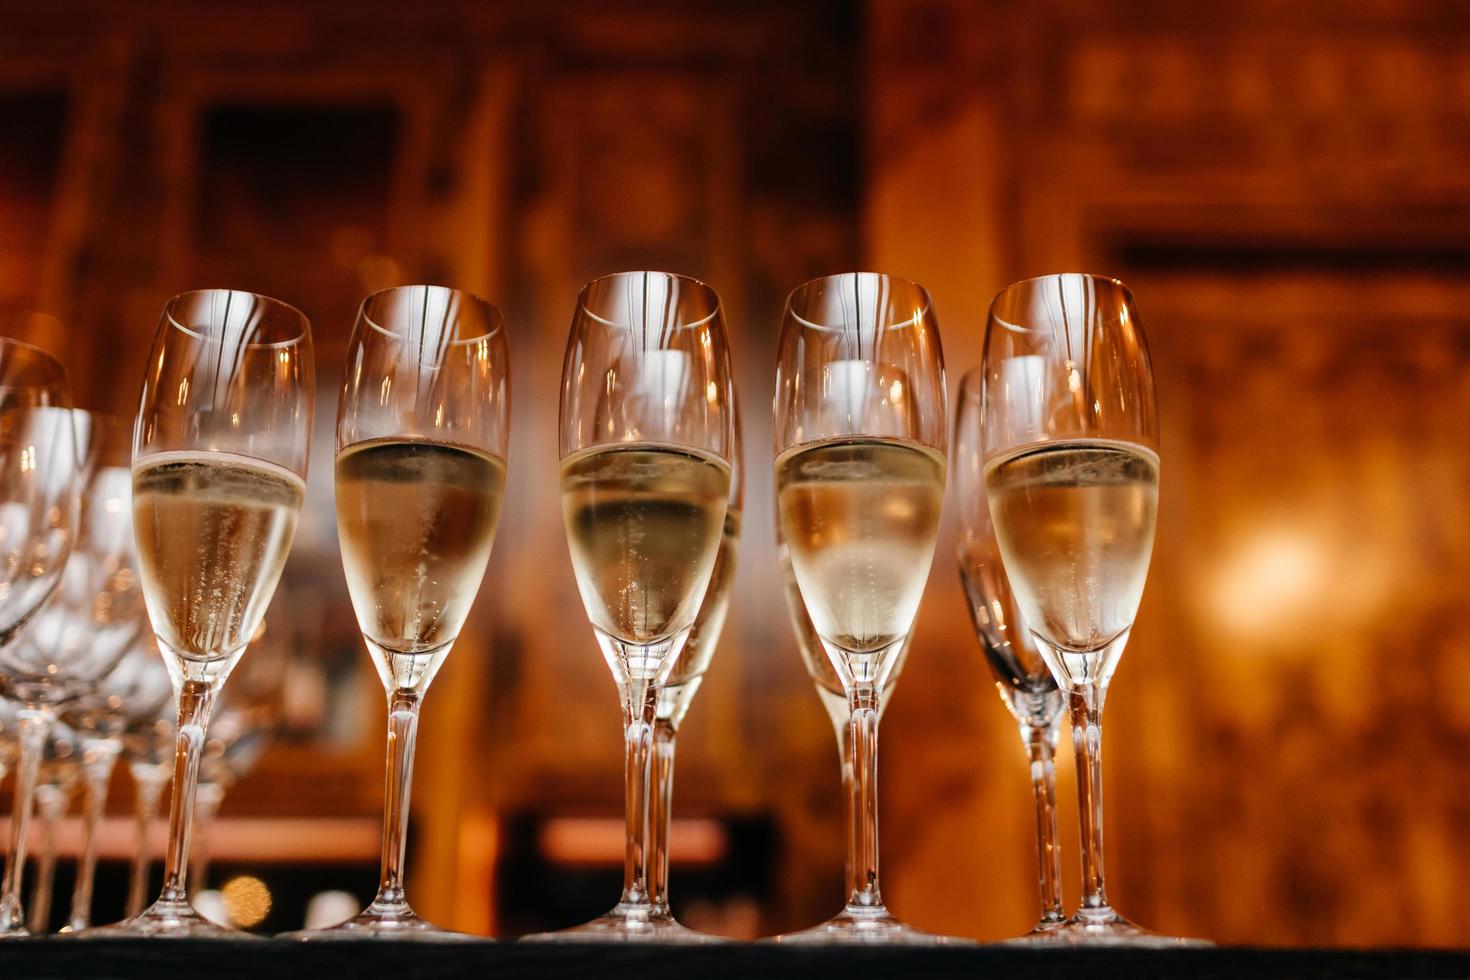 Horizontal shot of glasses with white wine or champagne in row against blurred background. Drink concept. Alcoholic beverage photo